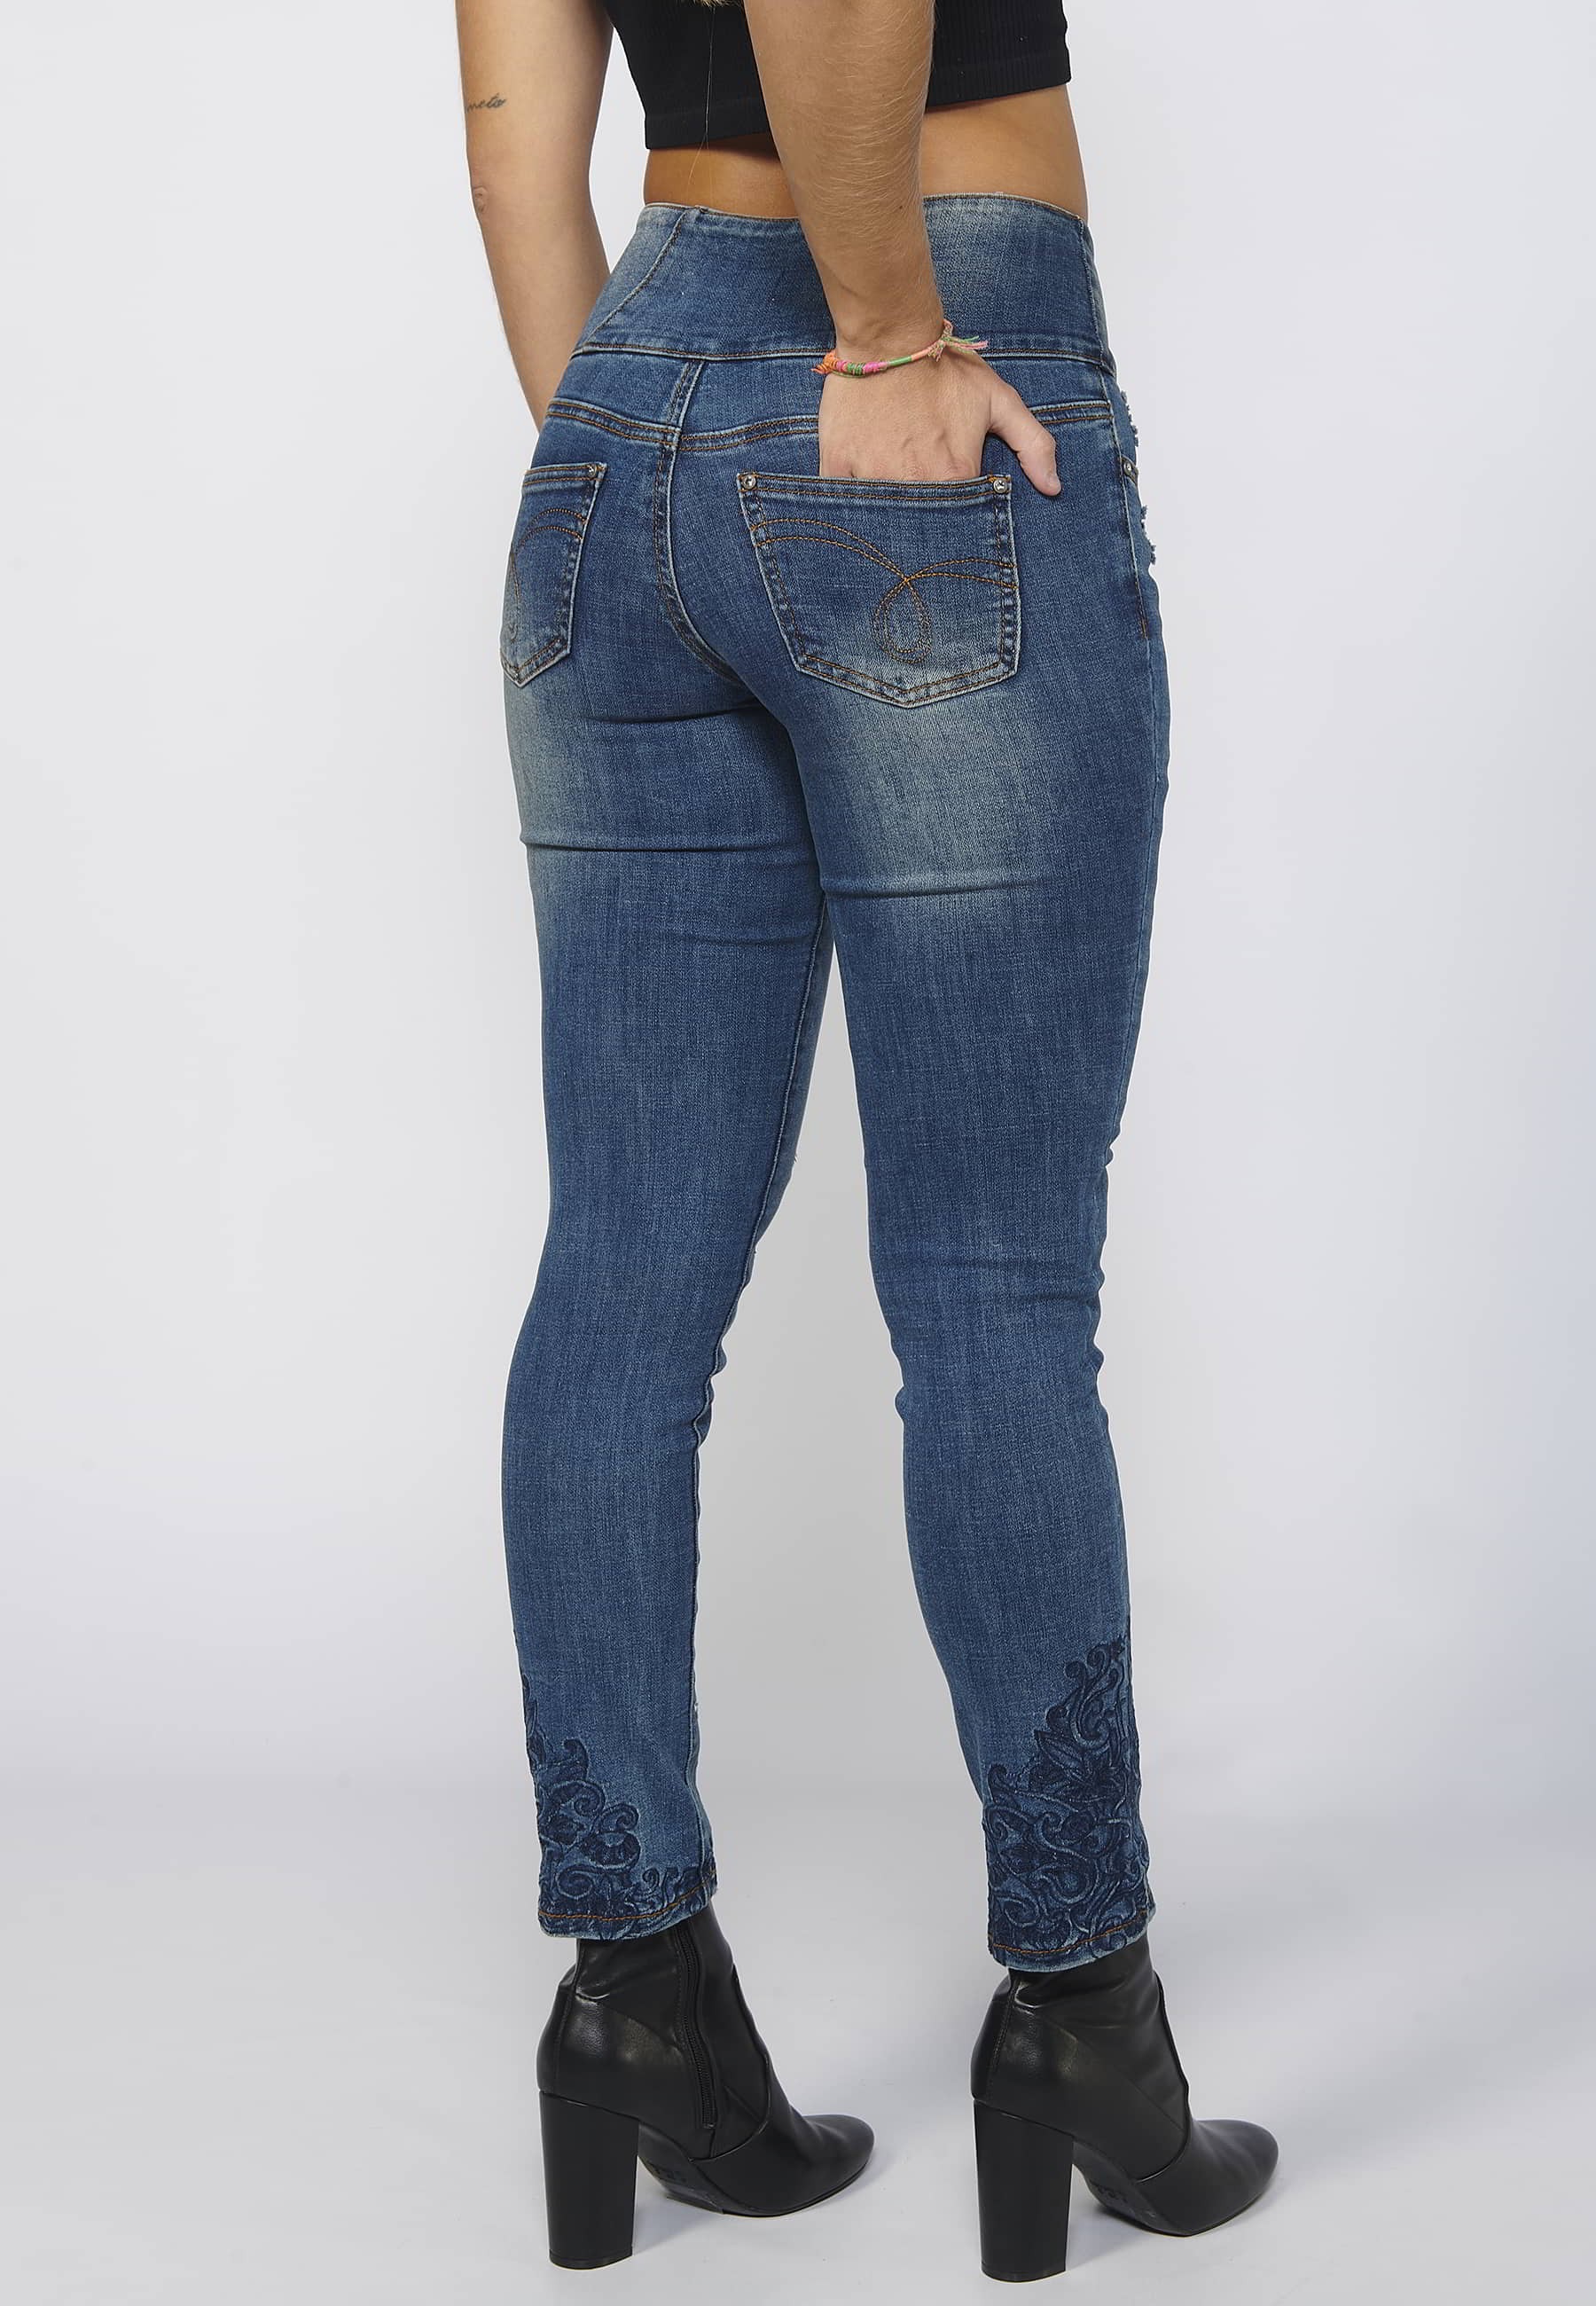 Long slim fit denim pants with sash waist and ripped details in Blue for Women